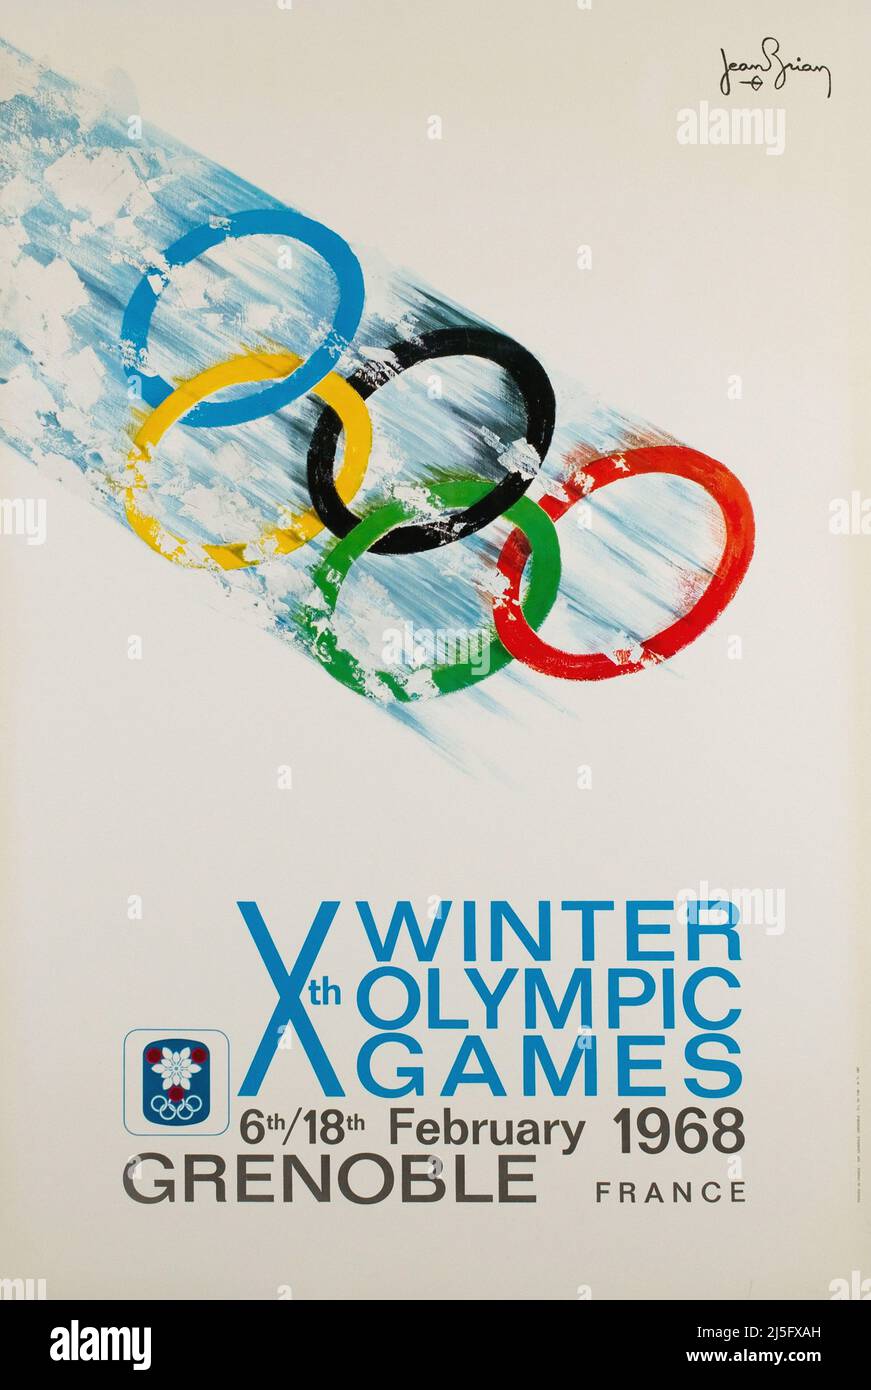 Vintage1968 Winter Olympic Games poster -  Grenoble, Xth Olympic Winter Games, Grenoble 1968 By Jean BRIAN Stock Photo